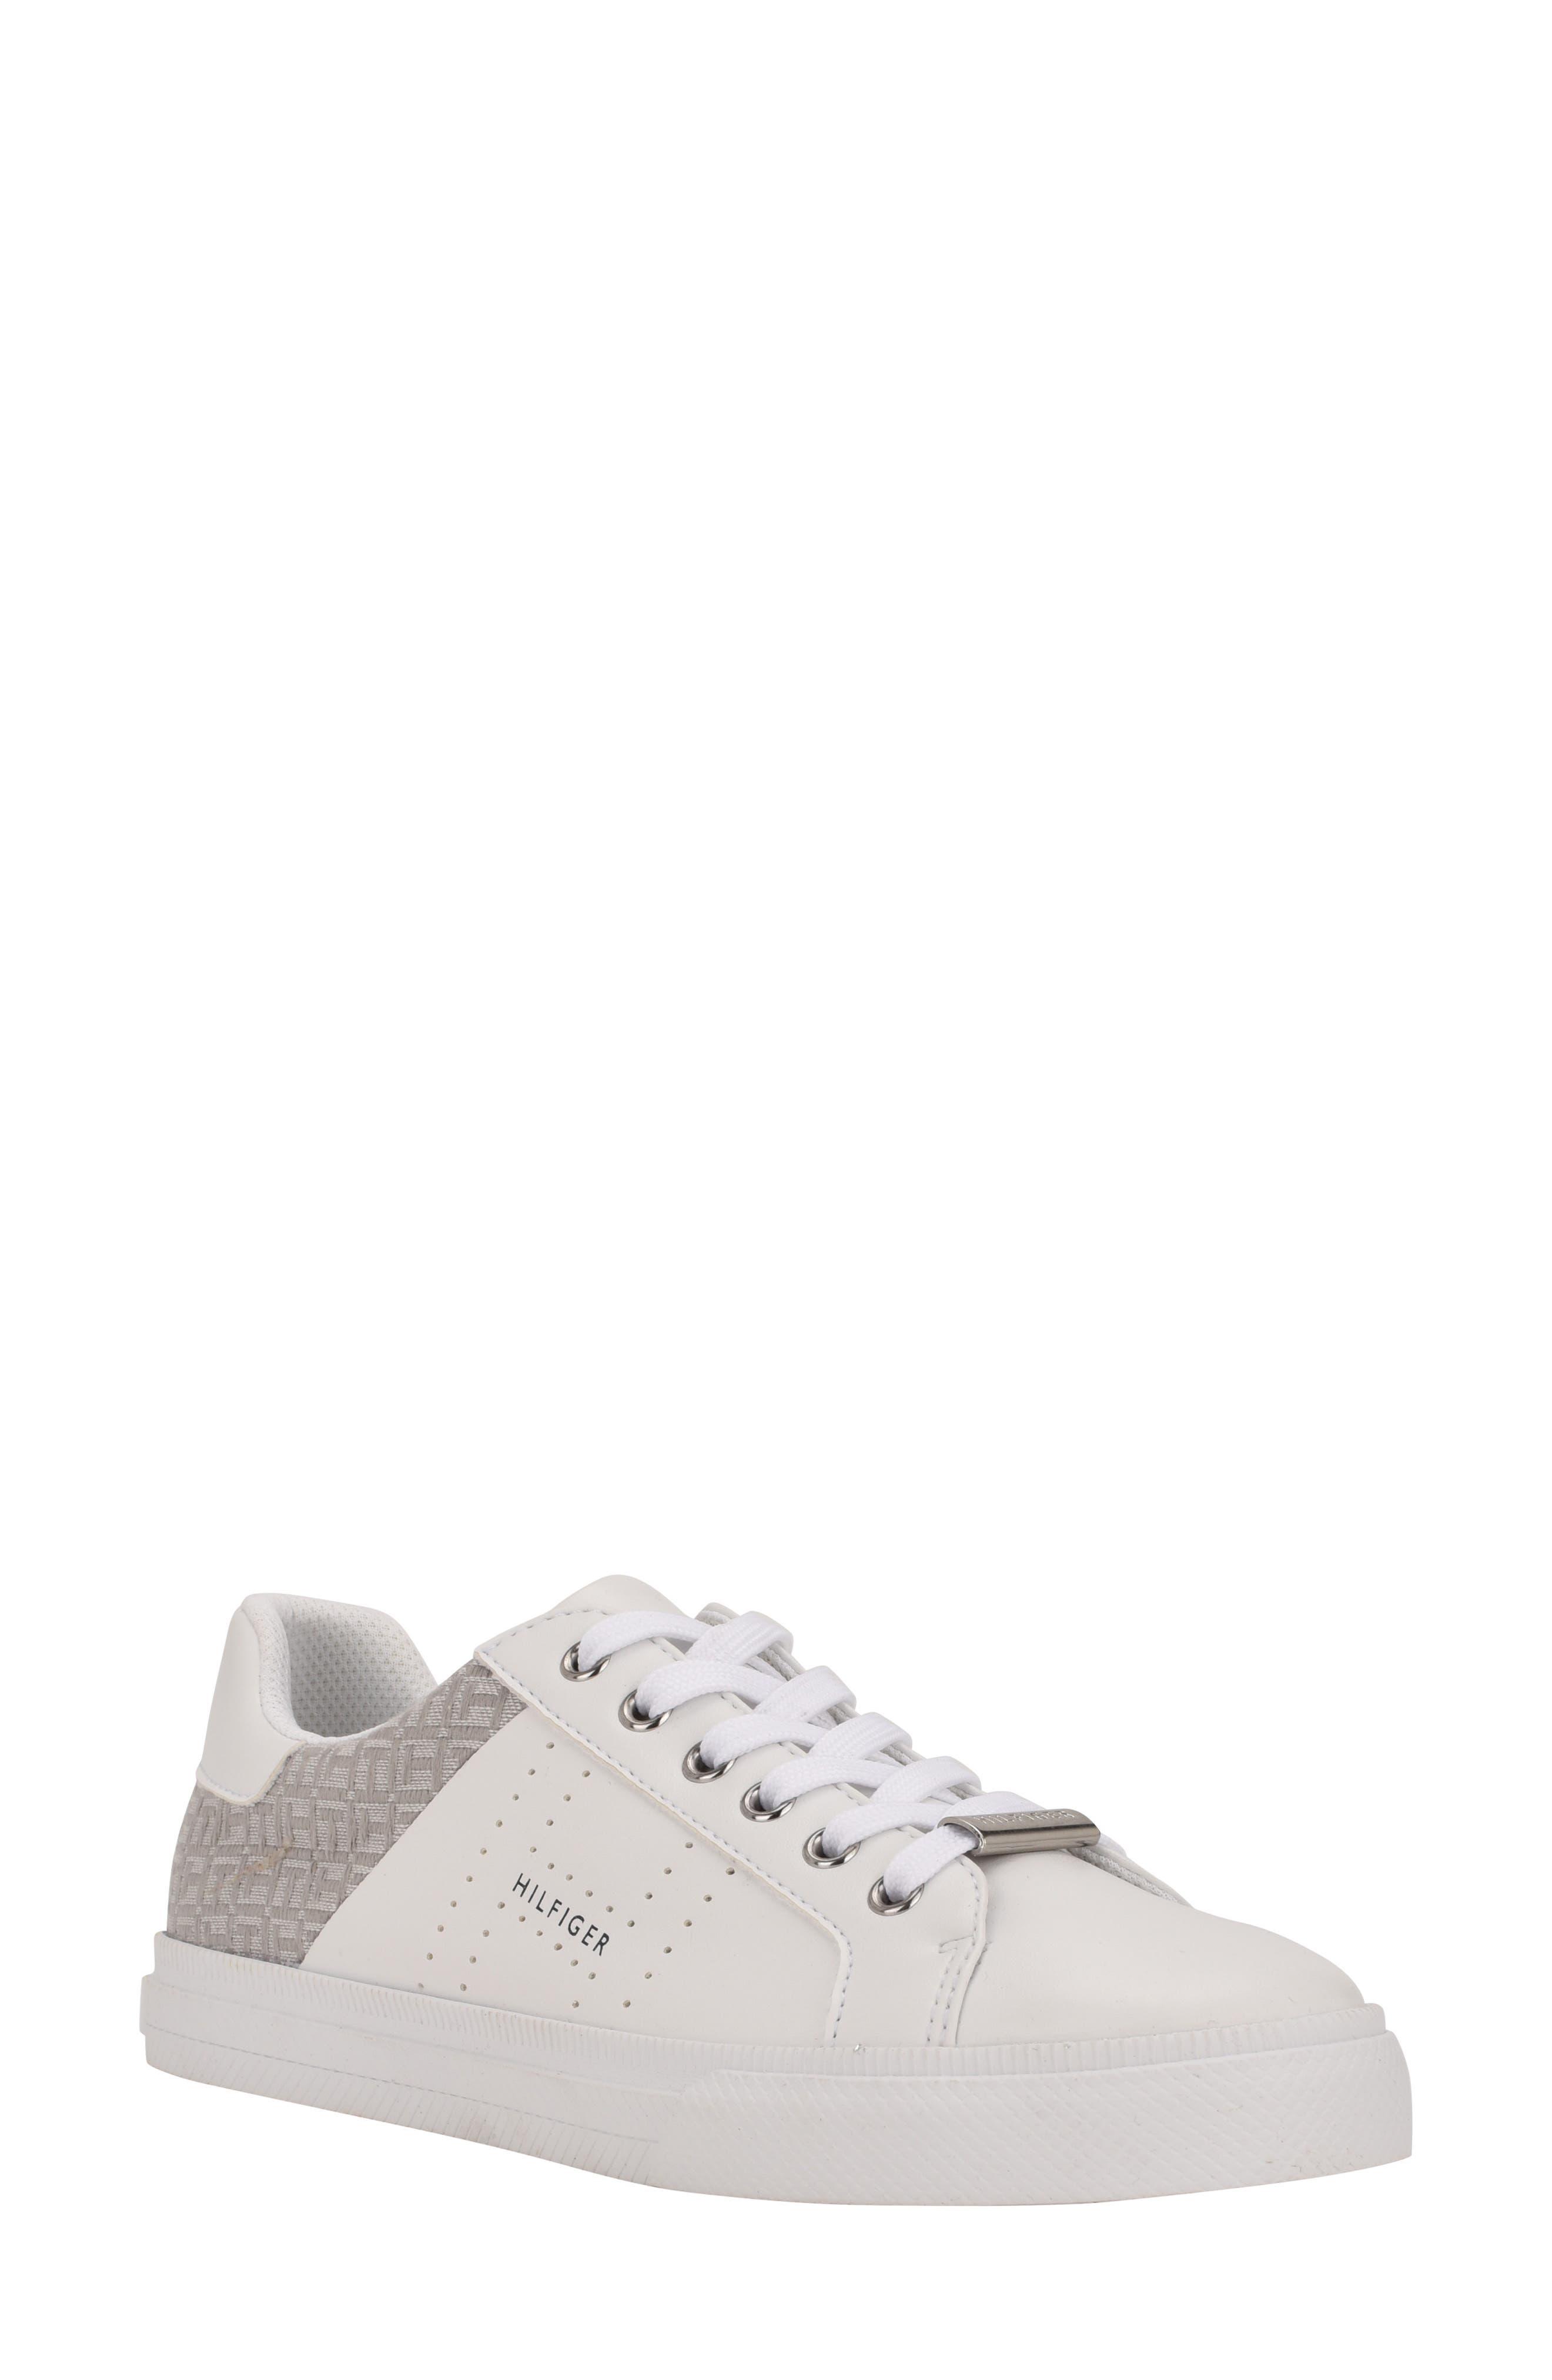 Tommy Hilfiger Logo Panel Fashion Sneaker in White | Lyst